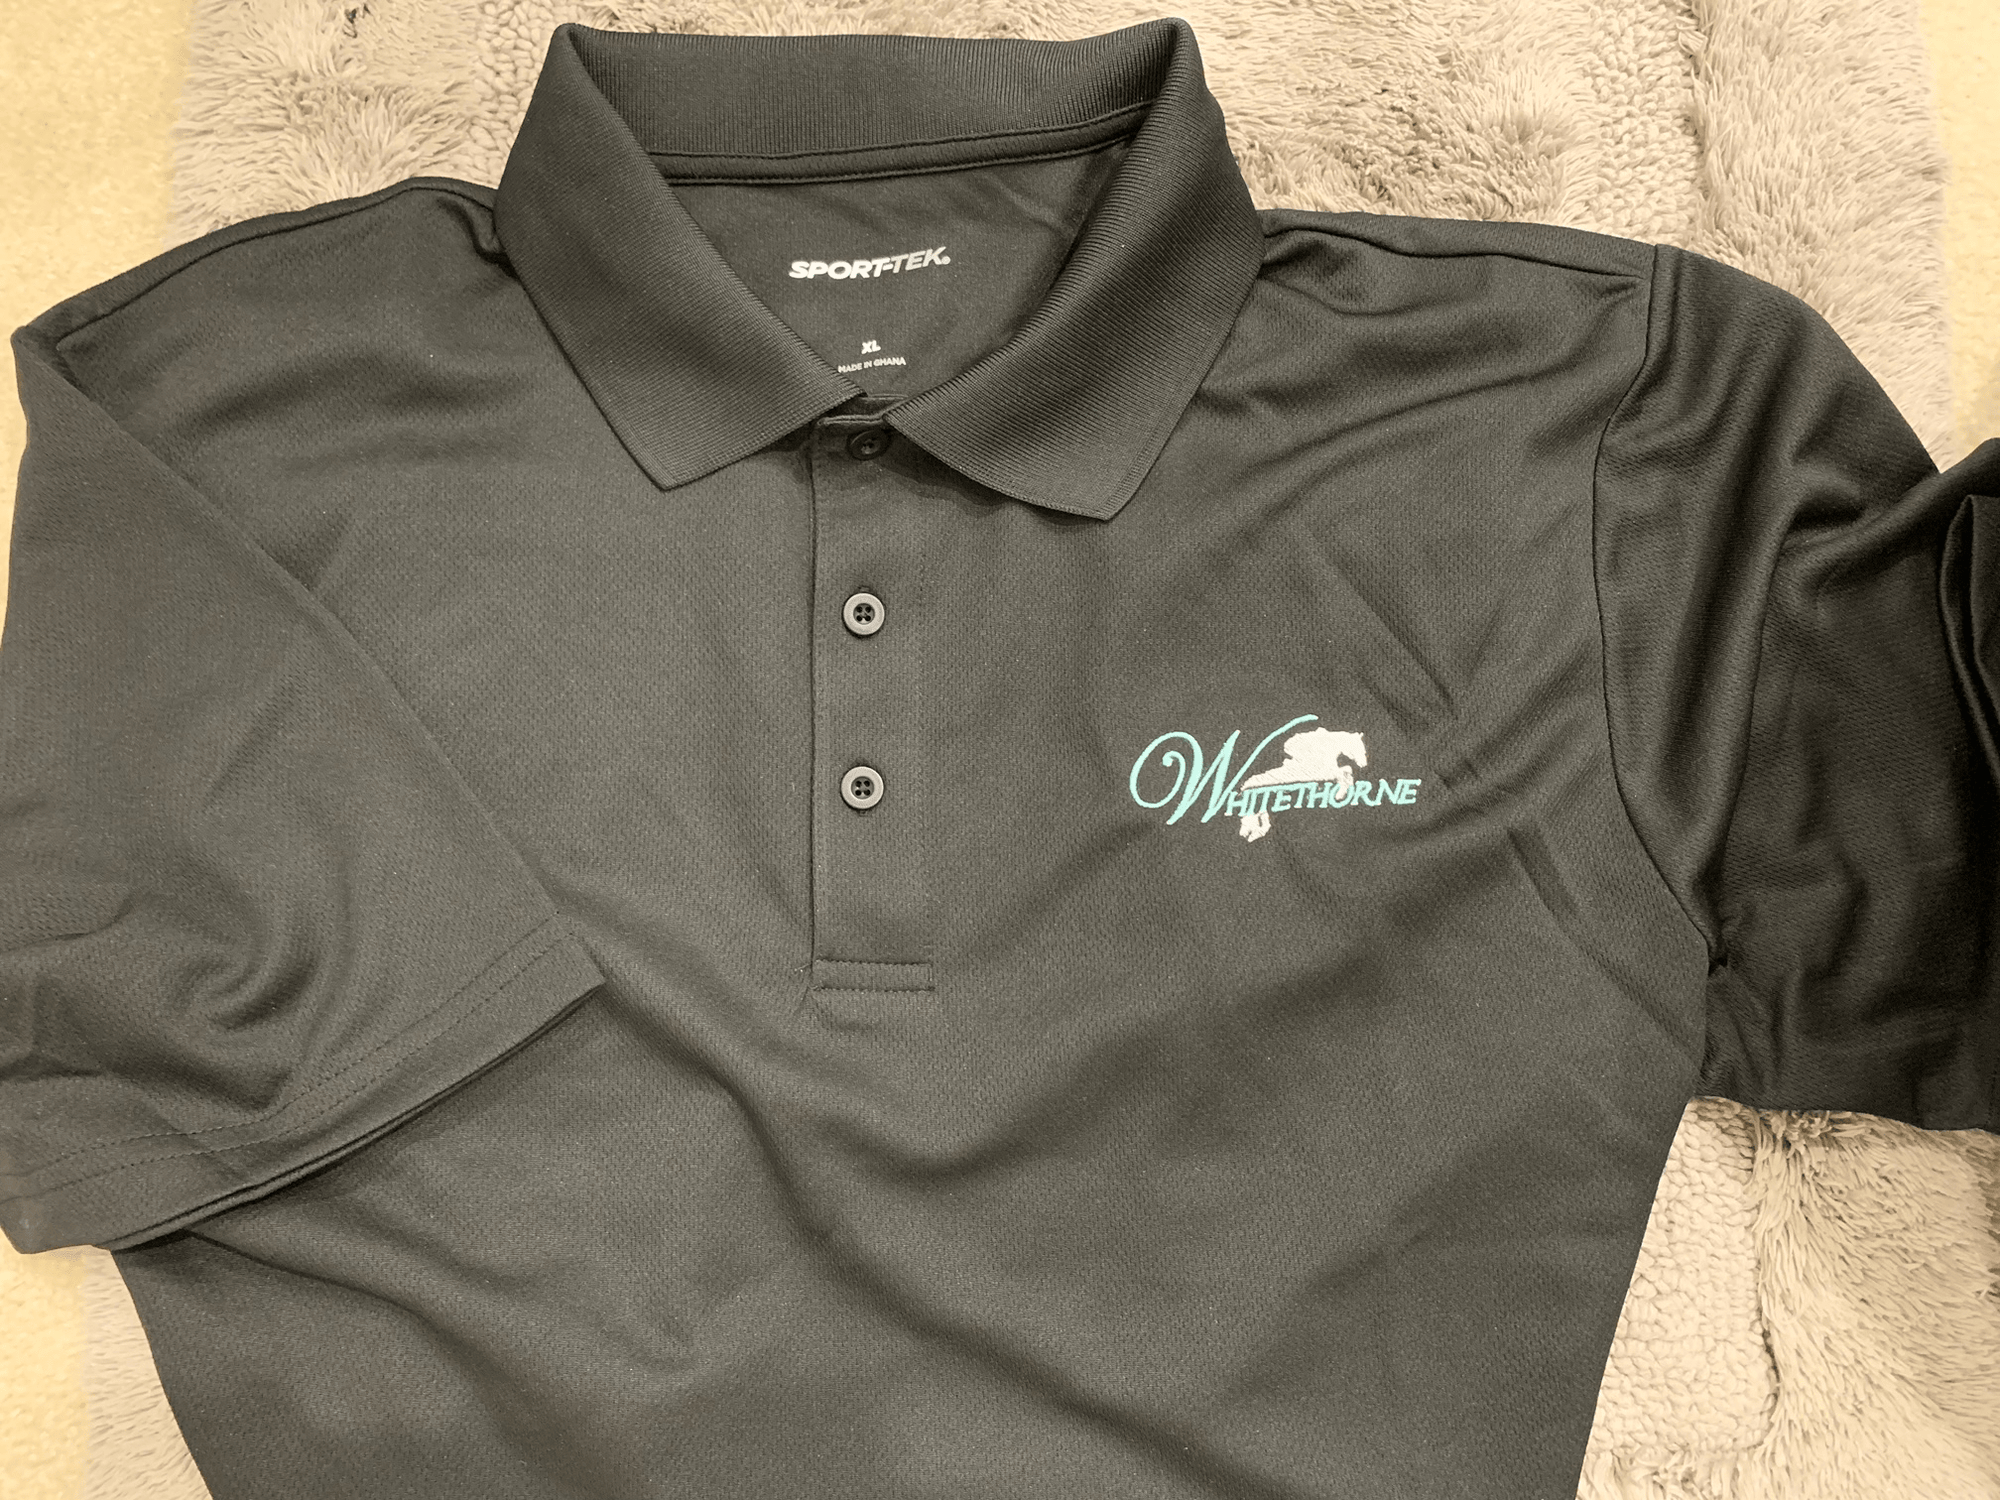 Equestrian Team Apparel Custom Shirts Whitehorne Polo Shirts equestrian team apparel online tack store mobile tack store custom farm apparel custom show stable clothing equestrian lifestyle horse show clothing riding clothes horses equestrian tack store